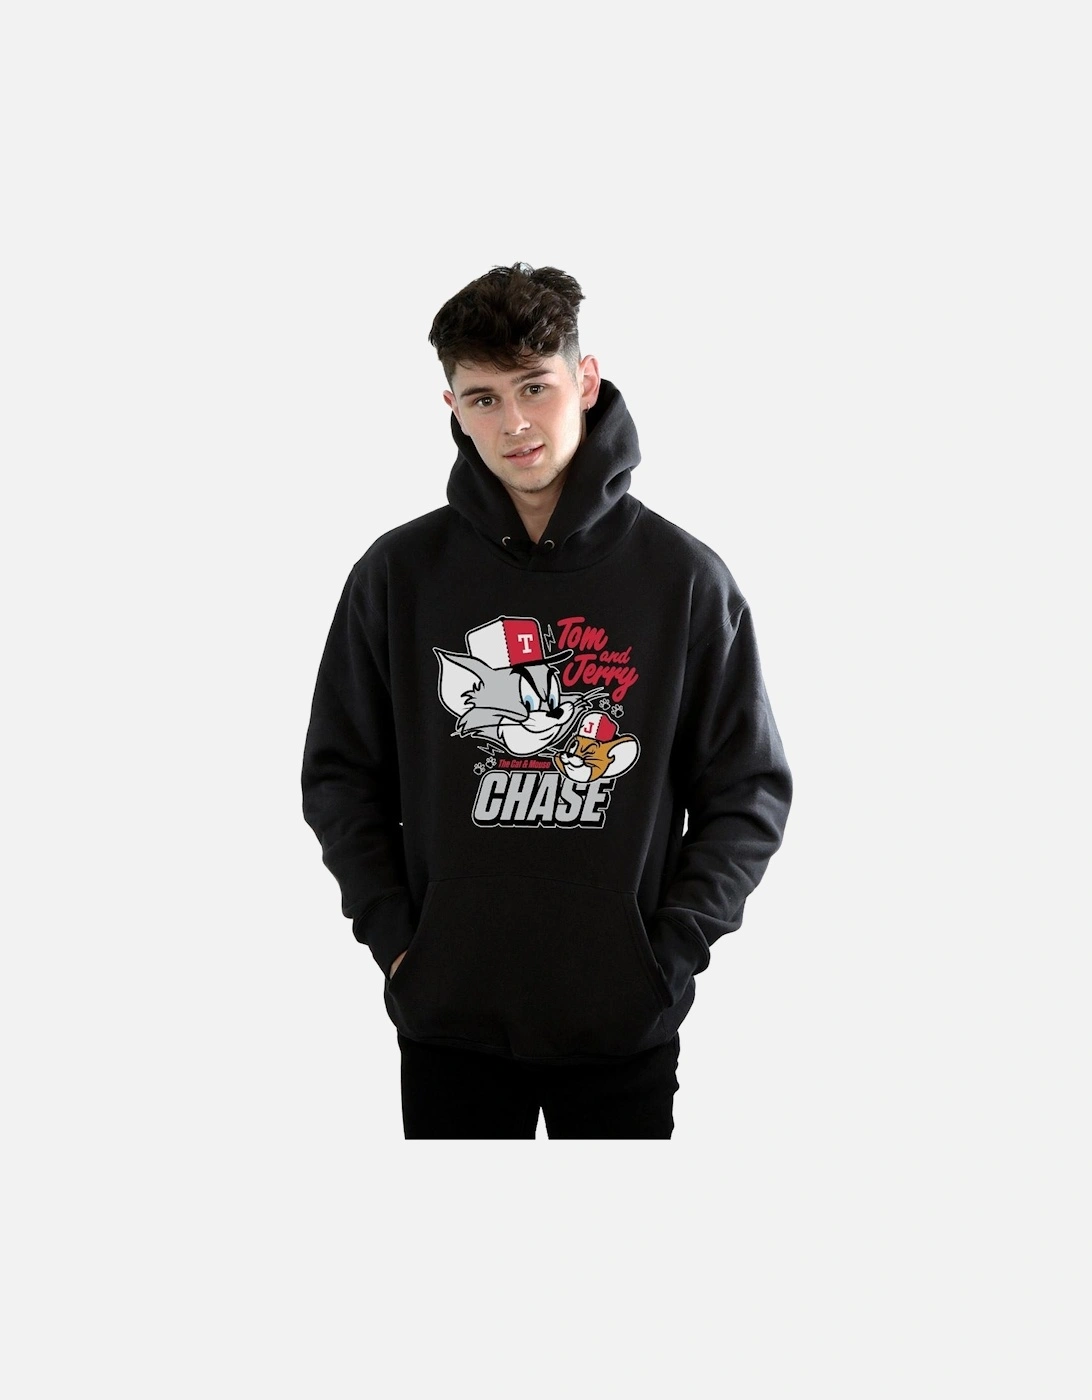 Tom And Jerry Mens Cat & Mouse Chase Hoodie